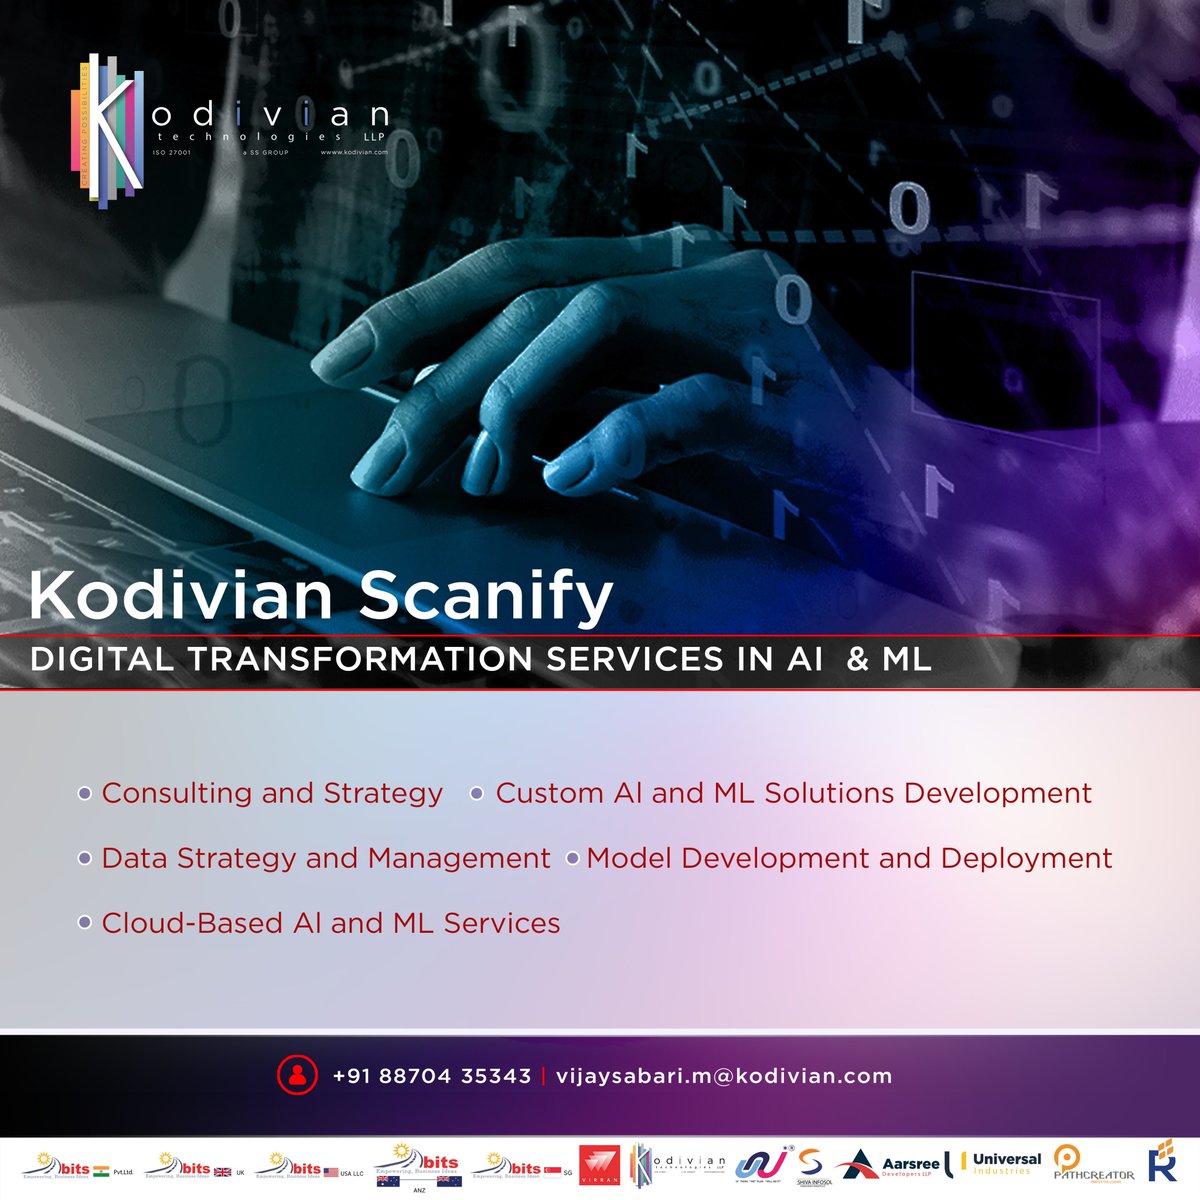 Digital Transfromation Services in AI & ML...
#kodivian #ssgroupofcompanies #ssgroup #ai #ml #consulting #strategy #modeldevelopment #deployment #cloudbasedai #mlservices